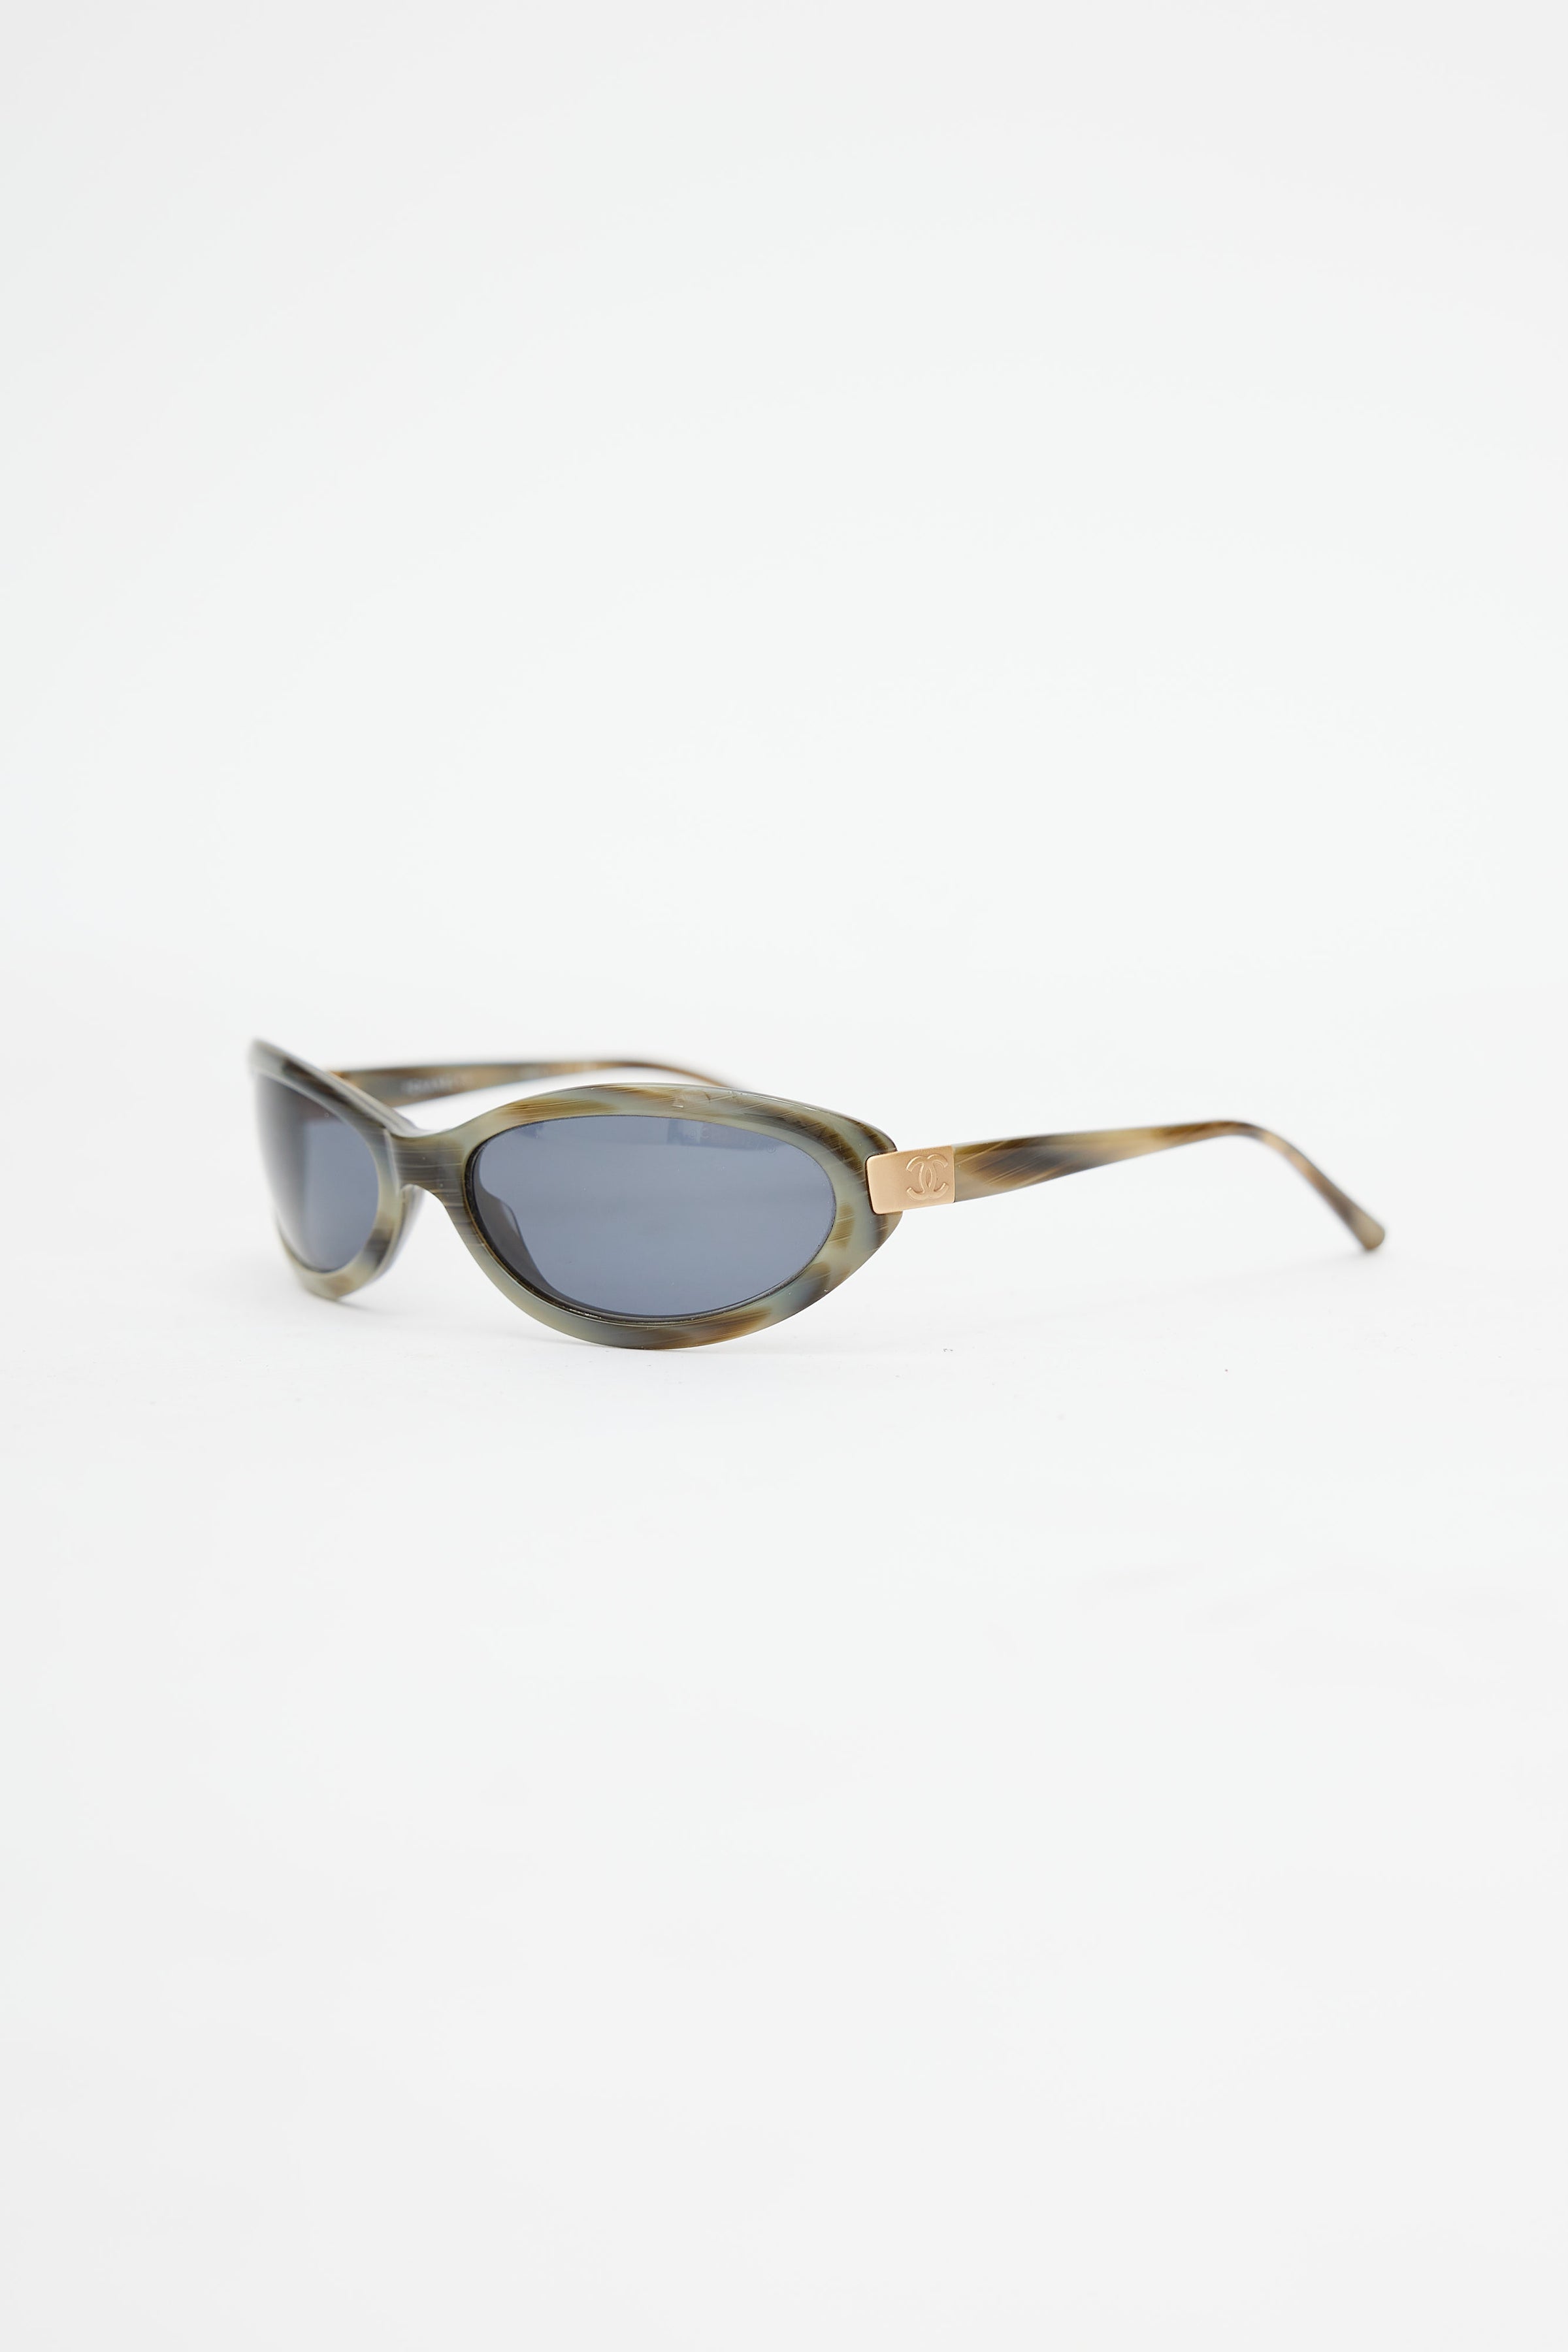 Chanel // Green Gradient 5027 Oval Sunglasses – VSP Consignment